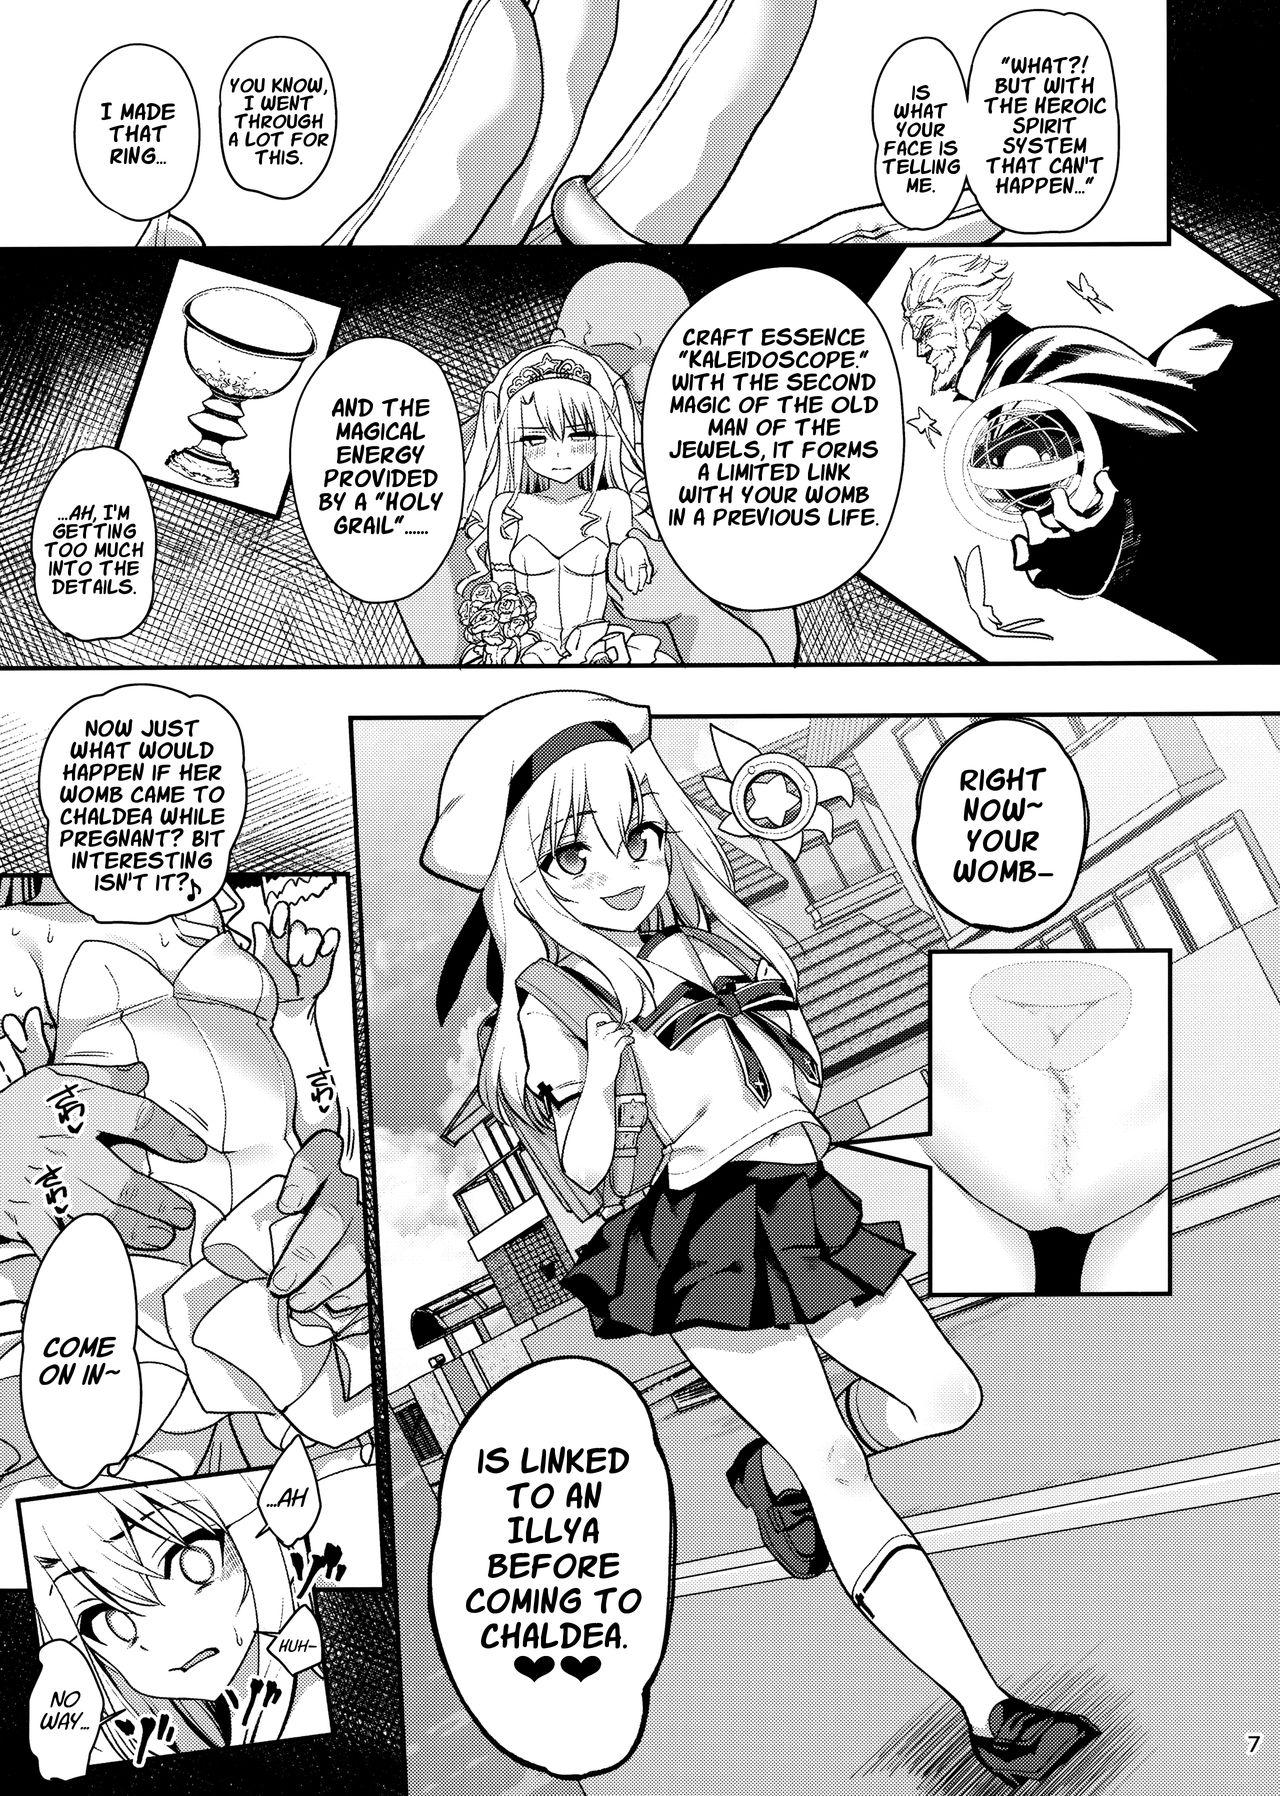 Cute Mahou Shoujo Saimin PakopaCause GAME OVER | Magical Girl Hypnosis Fucking Marathon GAME OVER - Fate grand order Fate kaleid liner prisma illya Pussy Orgasm - Page 8